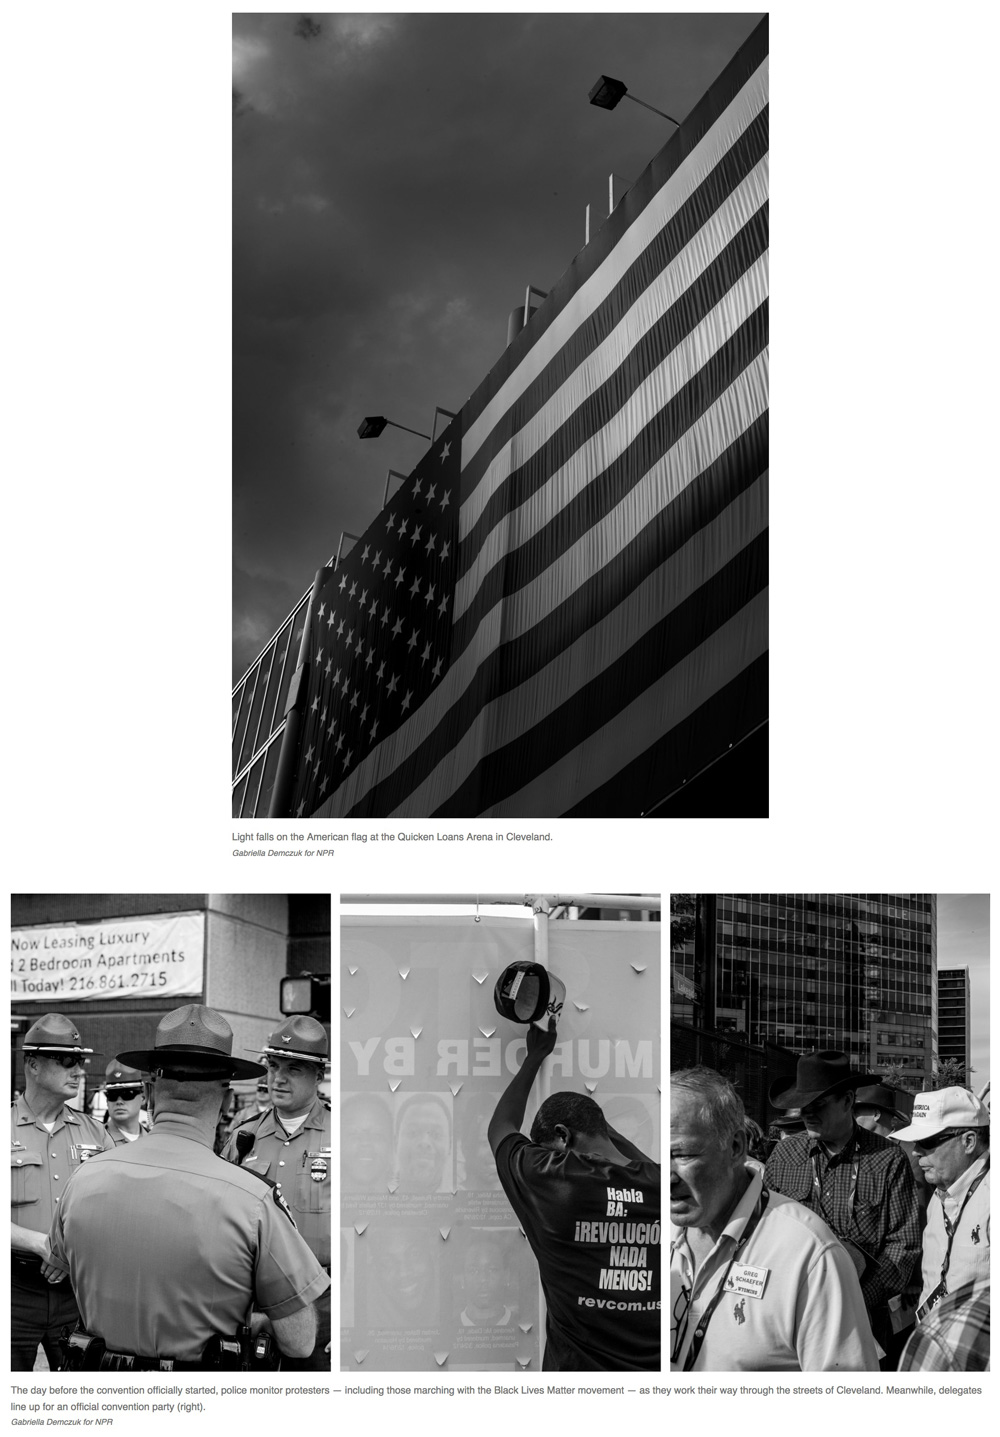  Photography:  Gabriella Demczuk   Photo Editing + Direction: Ariel Zambelich  Story:&nbsp; True Believers, Protesters And Trump: Scenes From Cleveland     